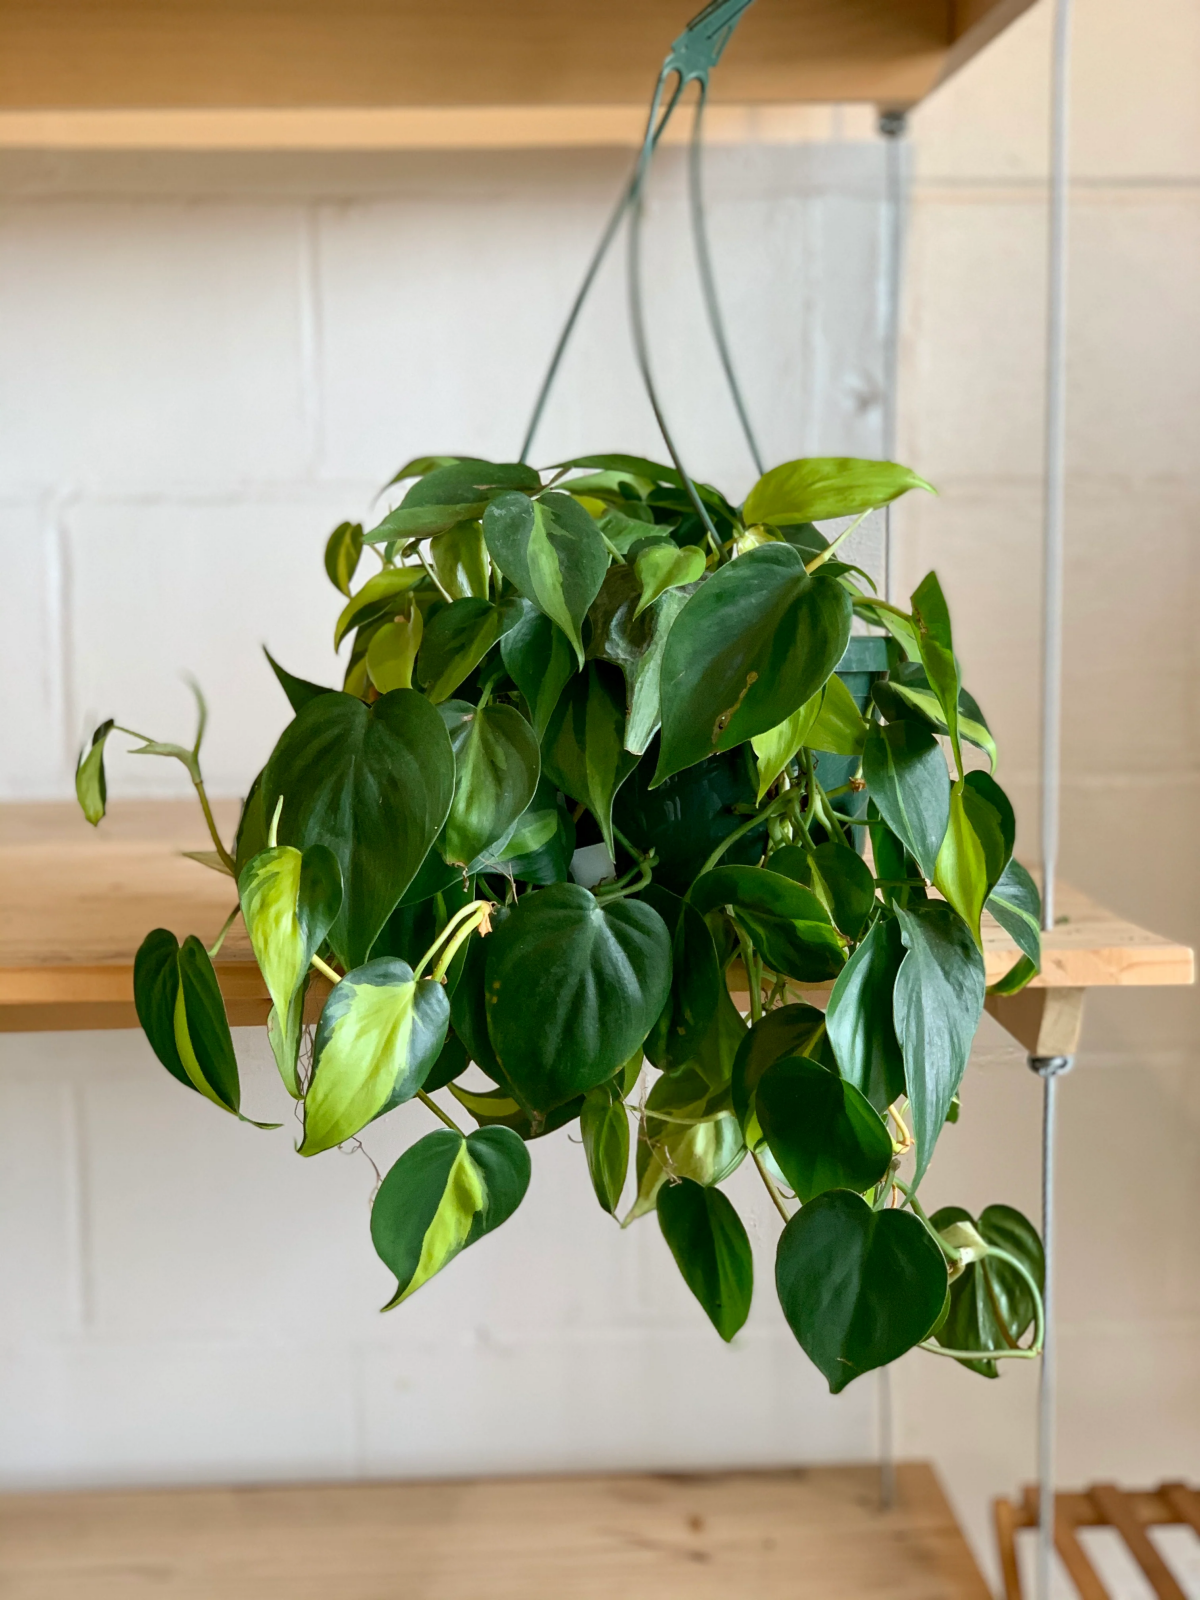 philodendron brasil plant at home